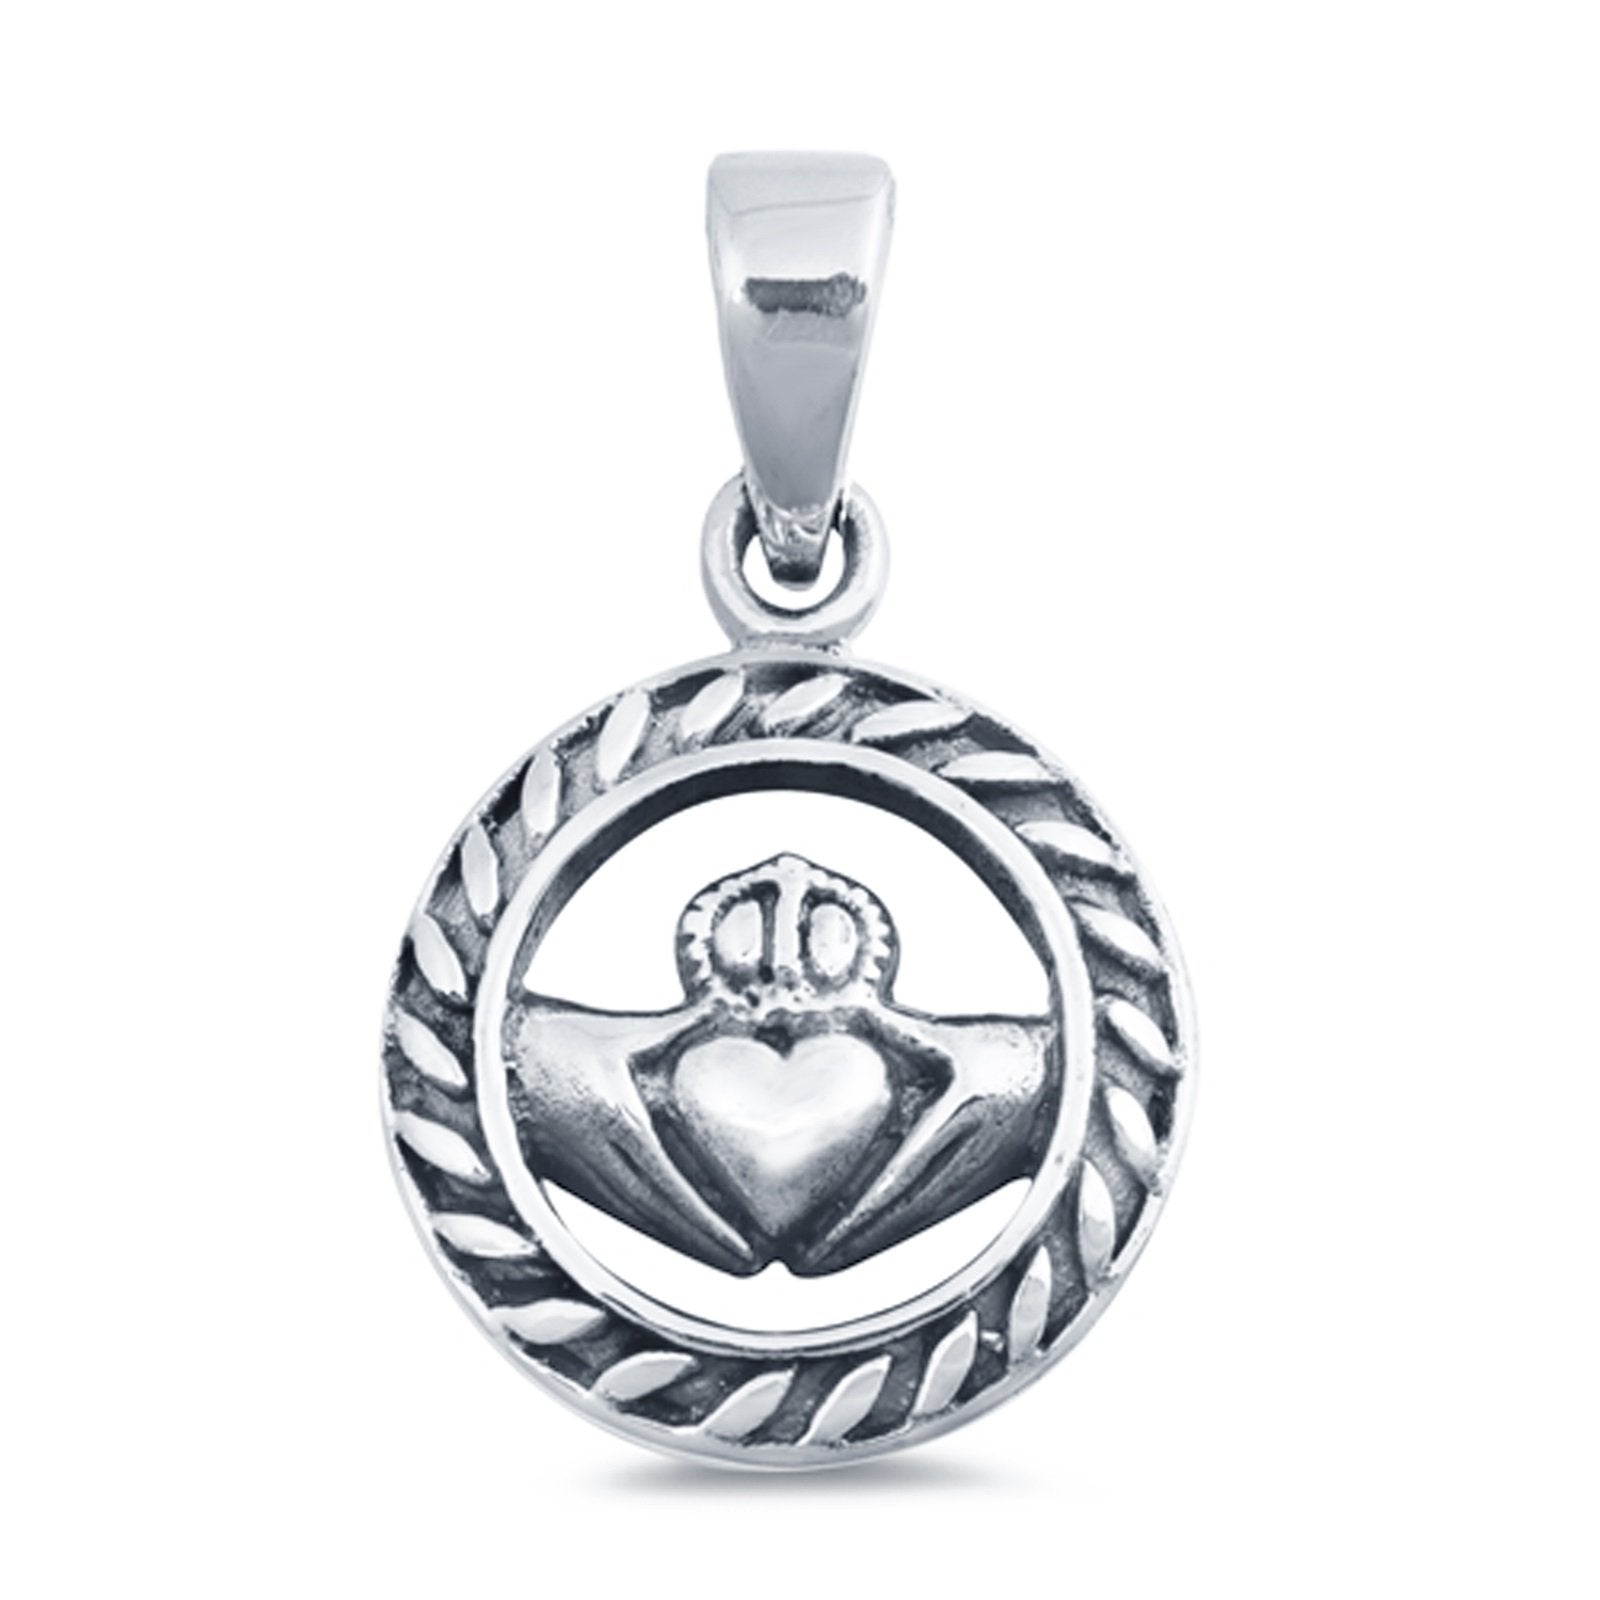 Silver Claddagh Pendant Charm Fashion Jewelry 925 Sterling Silver